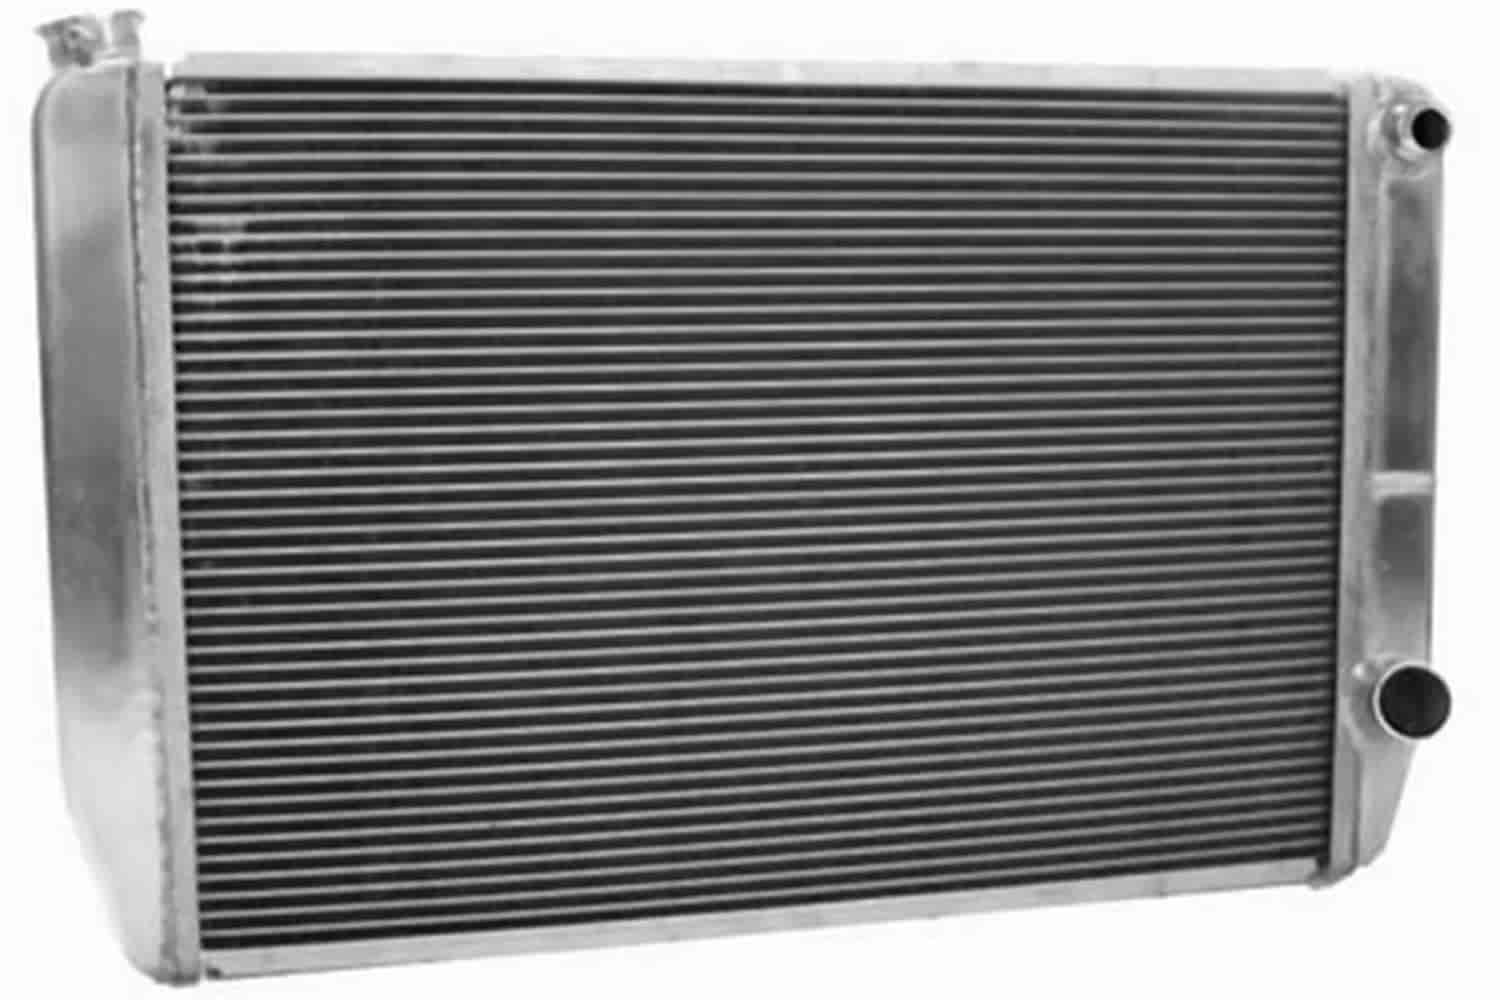 MegaCool Universal Fit Radiator Dual Pass Crossflow Design 31" x 15.50" with 16AN Inlet